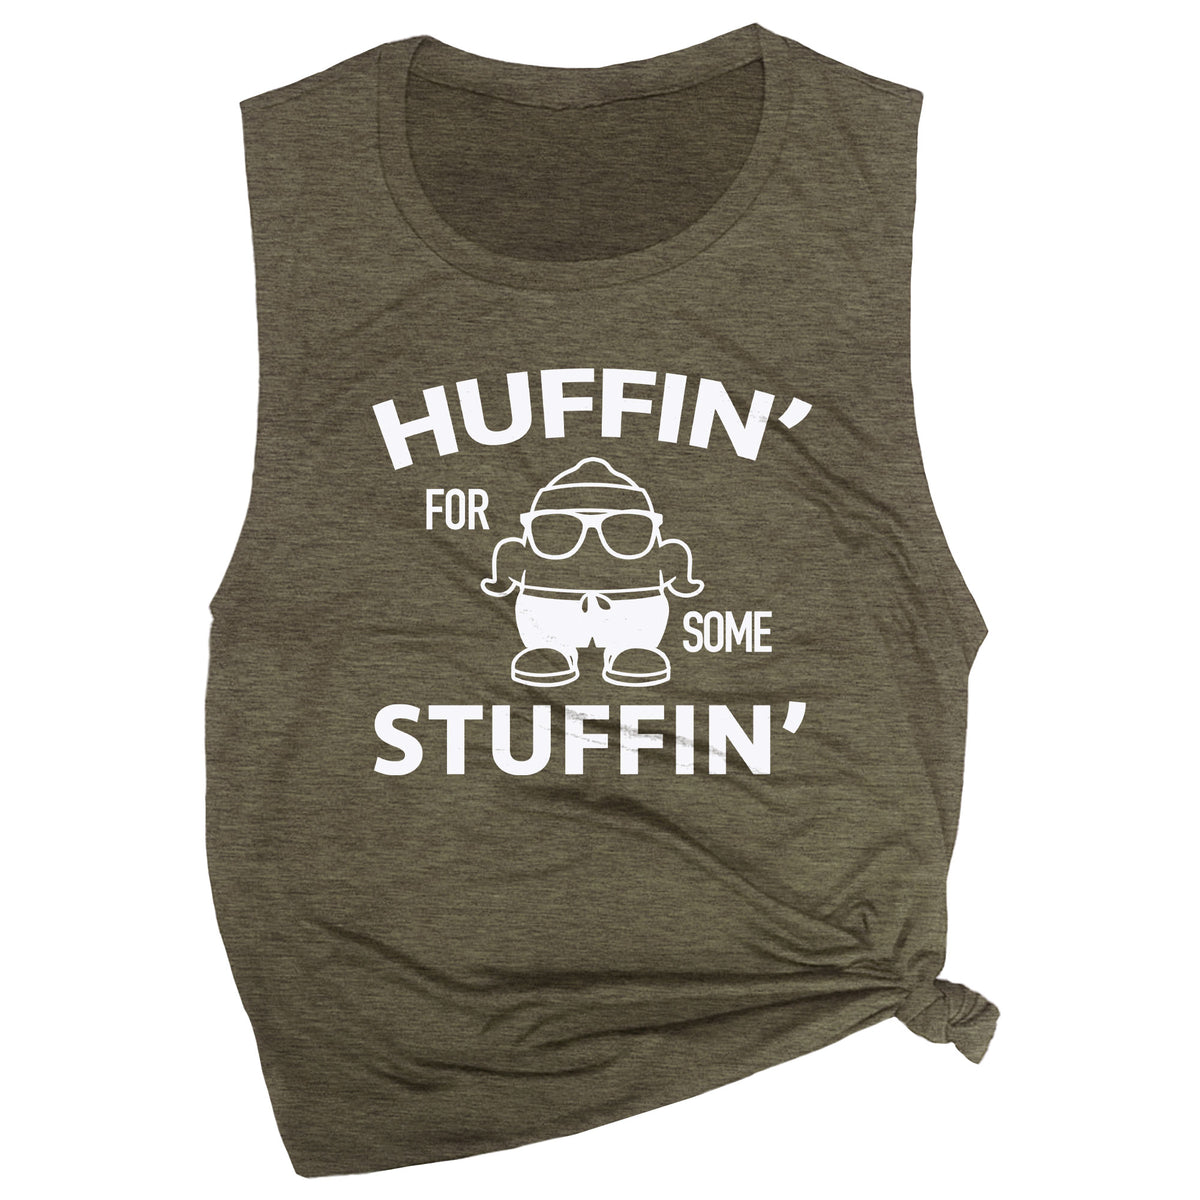 Huffin' for Some Stuffin' Muscle Tee